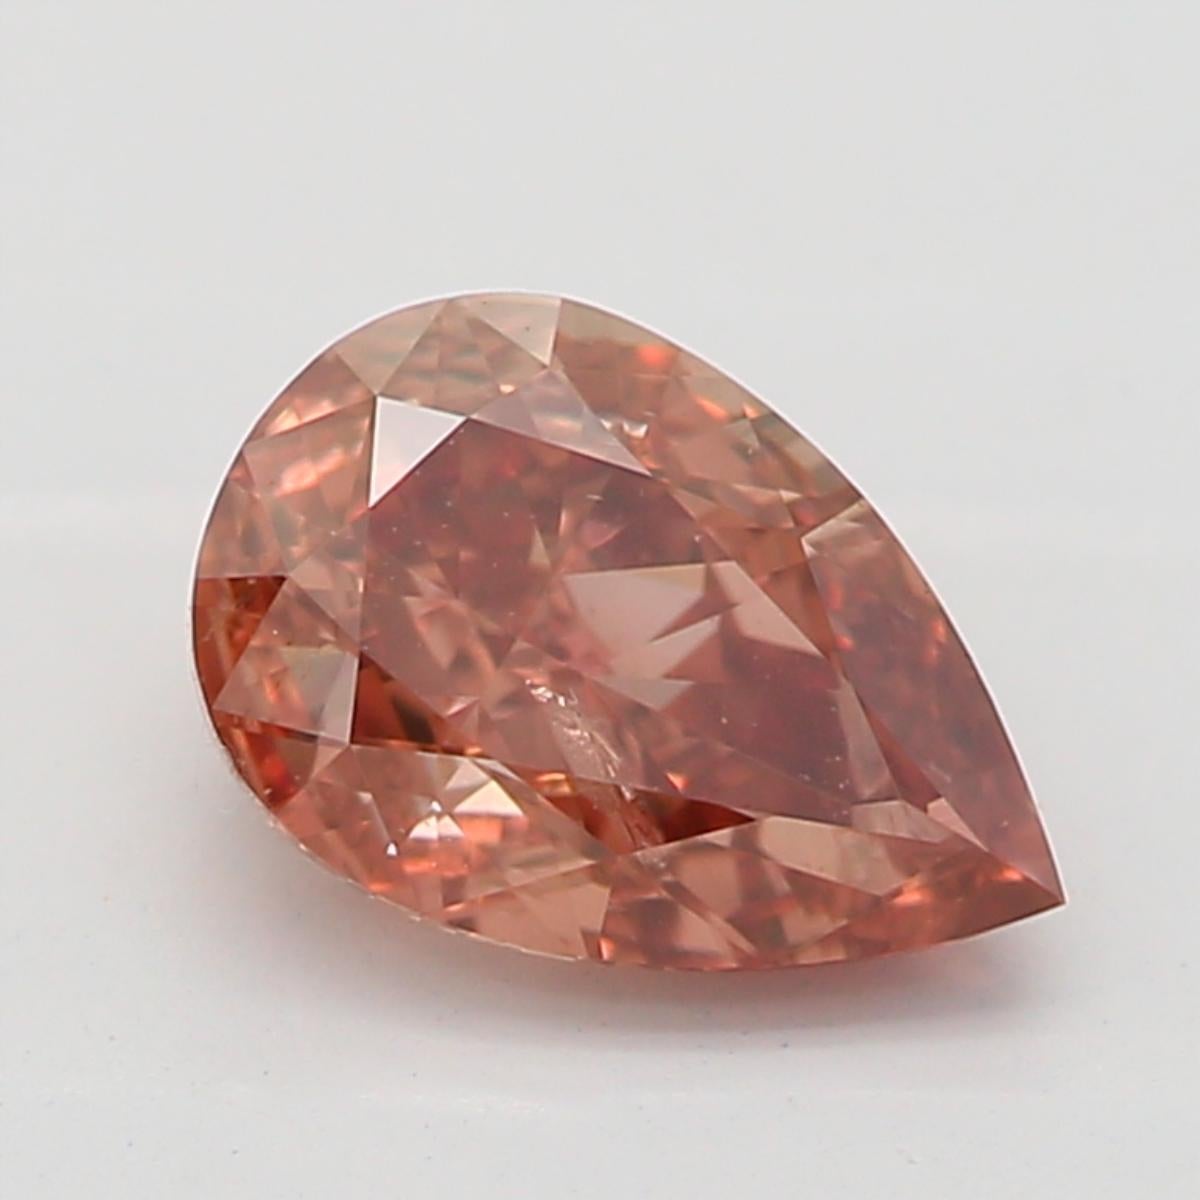 0.50 Carat Fancy Deep Brown Pink Pear Cut Diamond I1 Clarity GIA Certified For Sale 1